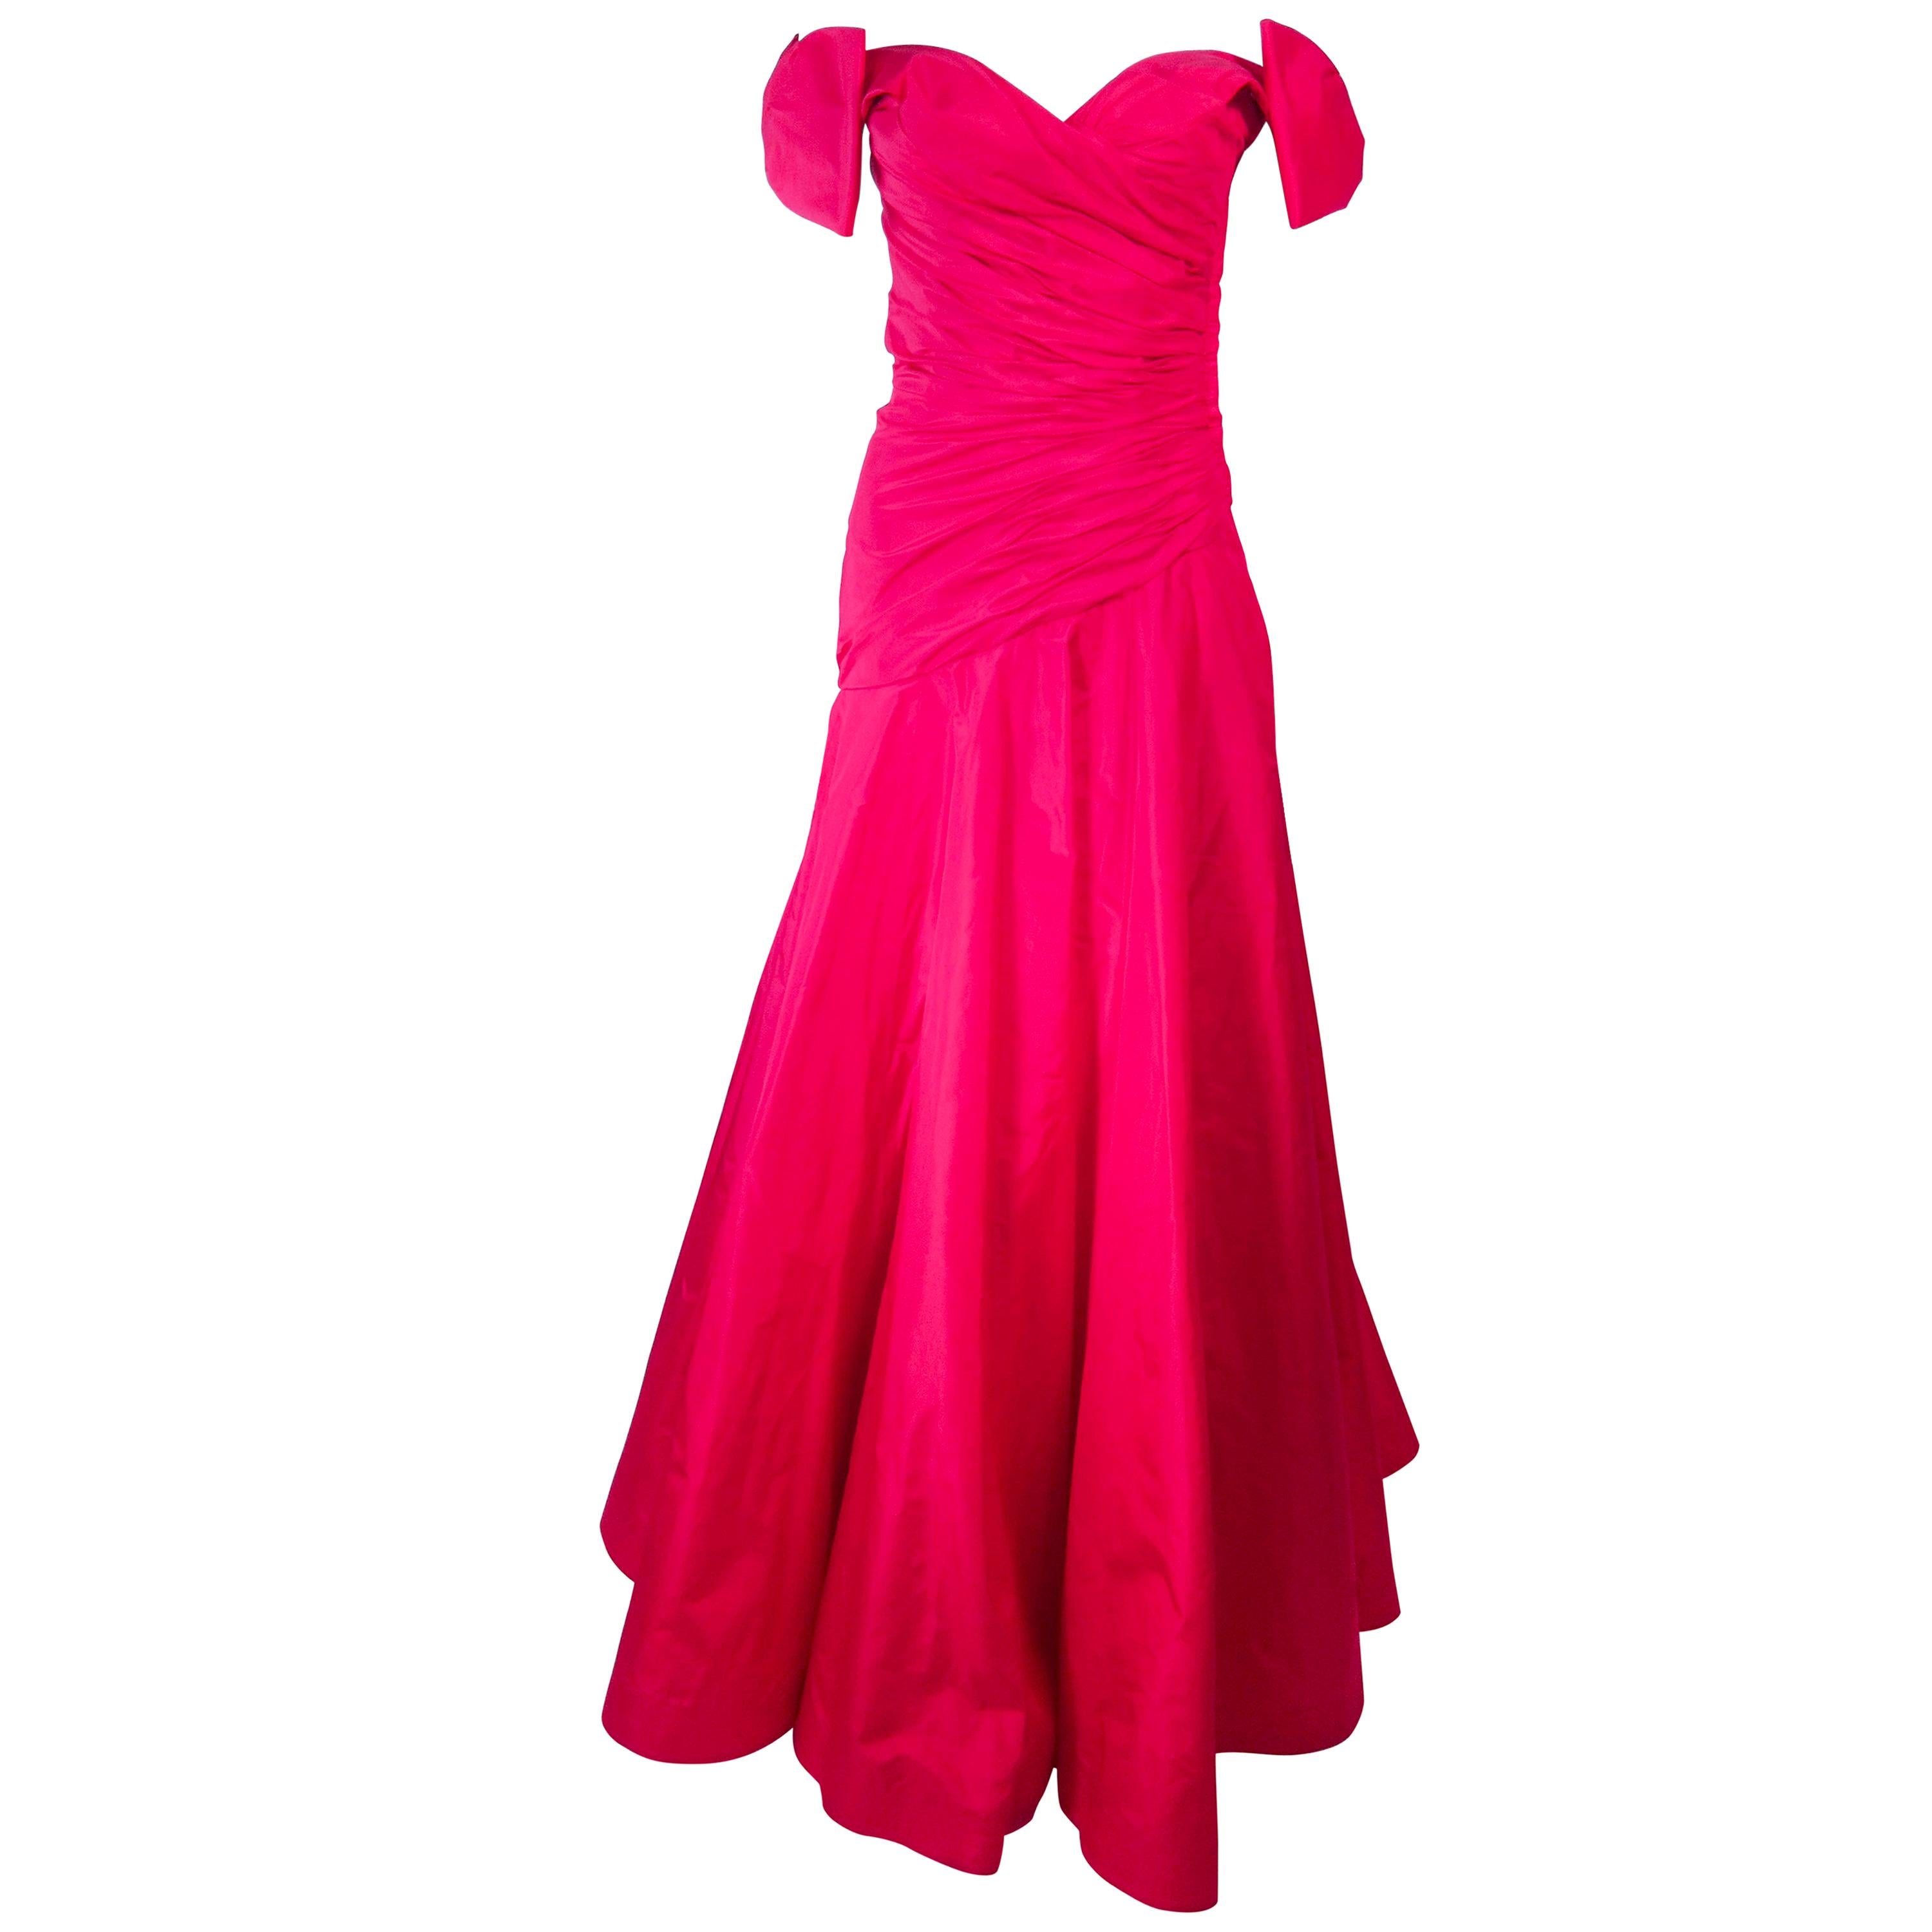 Murray Arbeid Red Ruched Taffeta Gown with Bow Details 